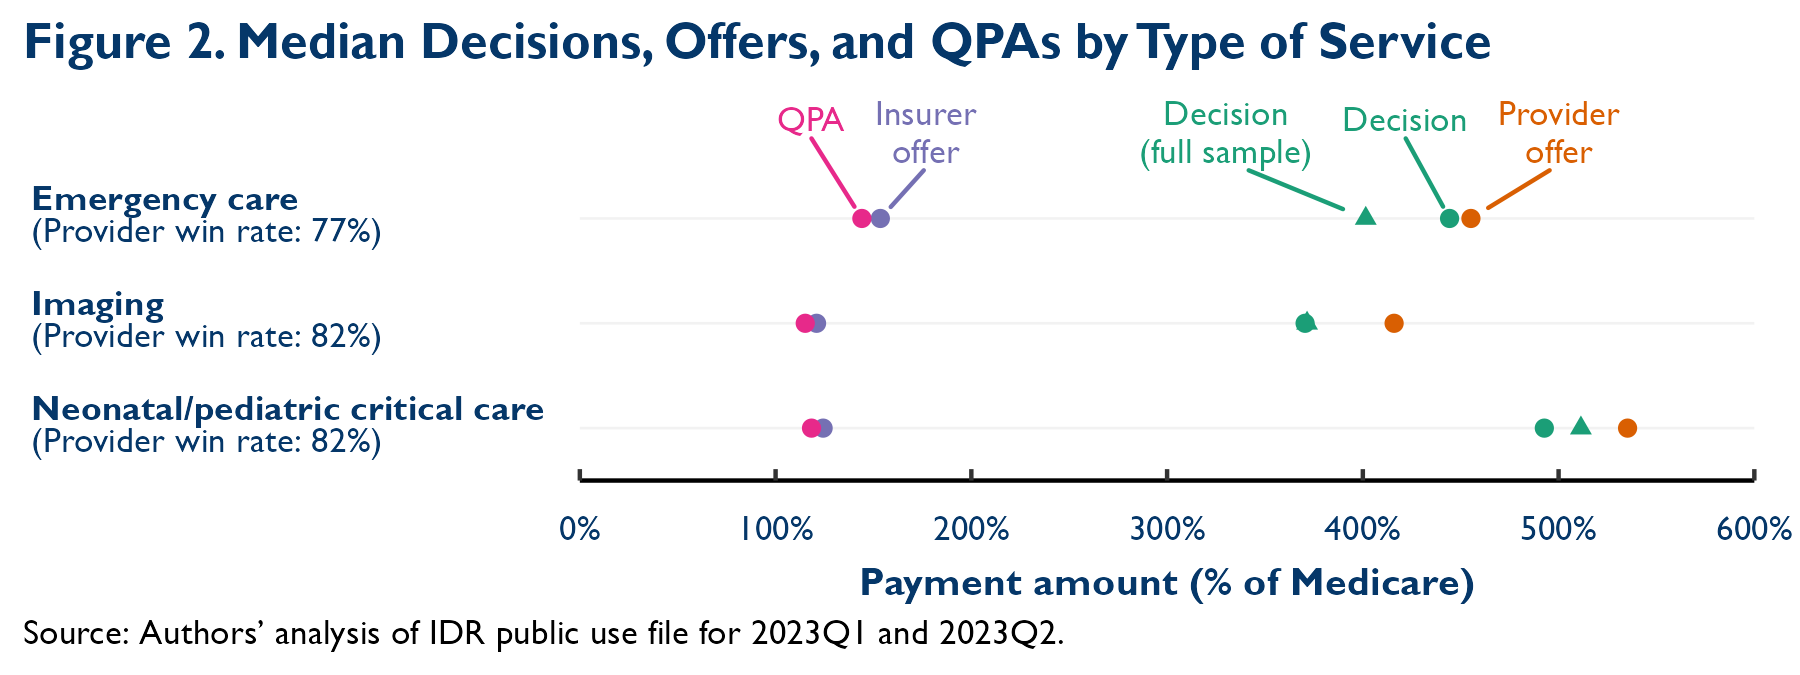 Brookings Institution showing median decisions, offers, and QPAs by type of service